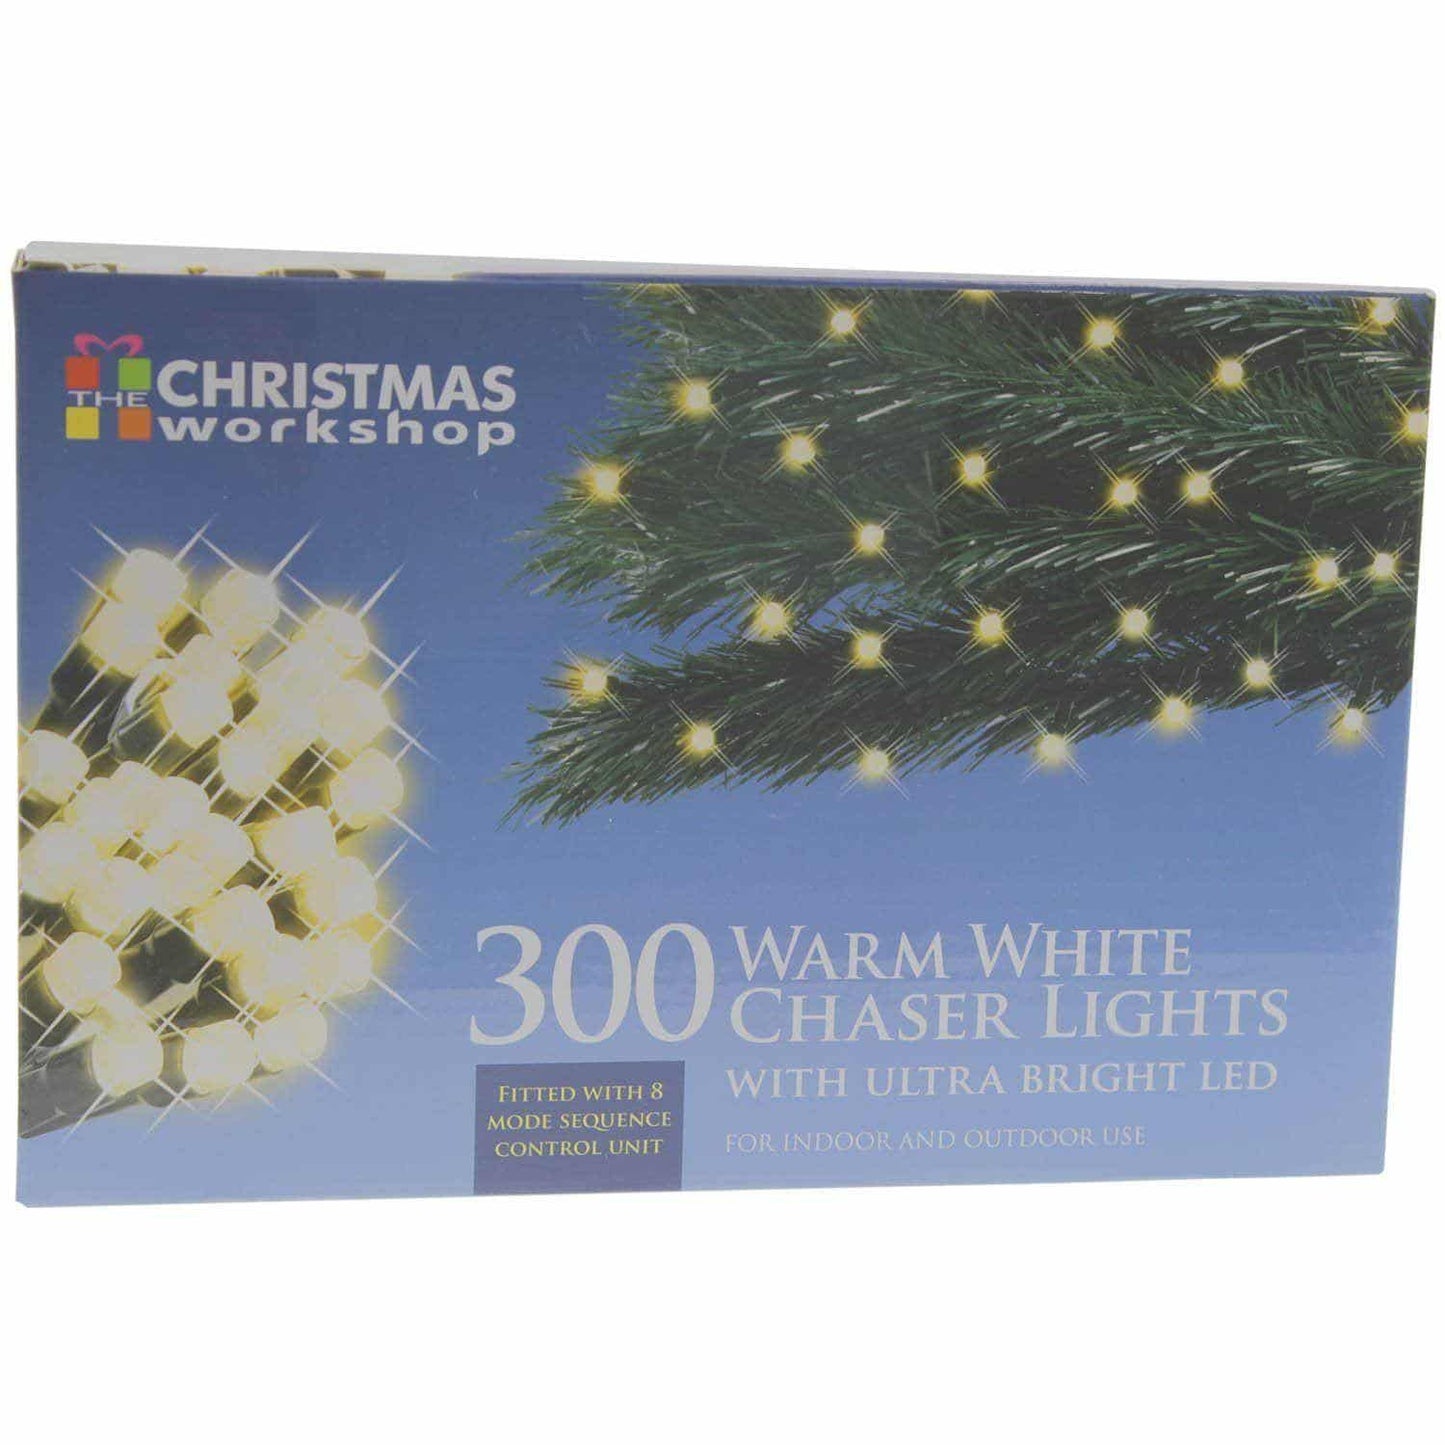 300 Warm White Chaser Lights WithUltra Bright LED